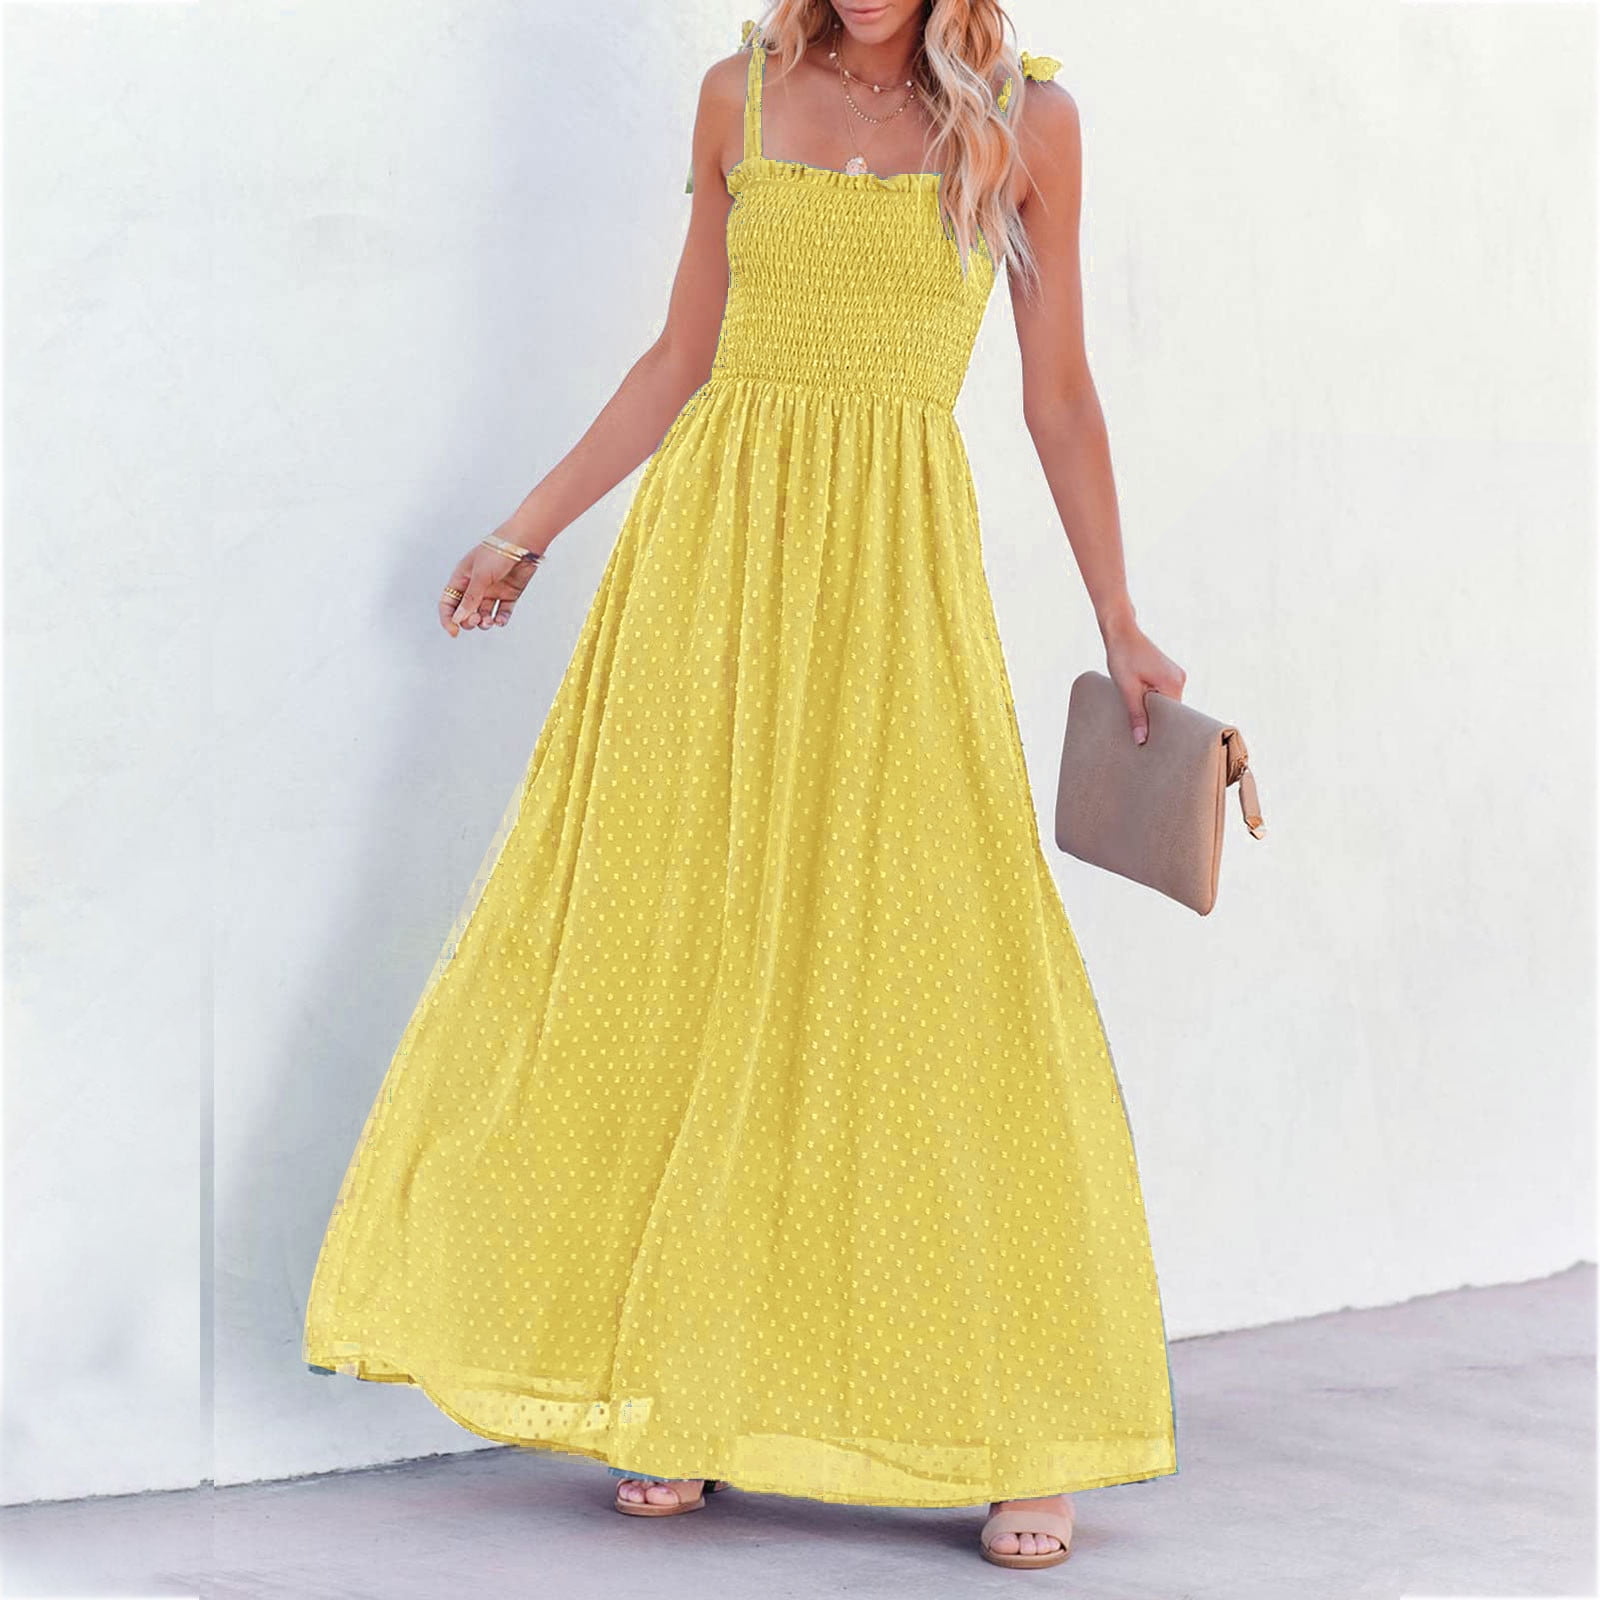 WEILI ZHENG Satin Long Dress in Yellow Womens Clothing Dresses Casual and summer maxi dresses 